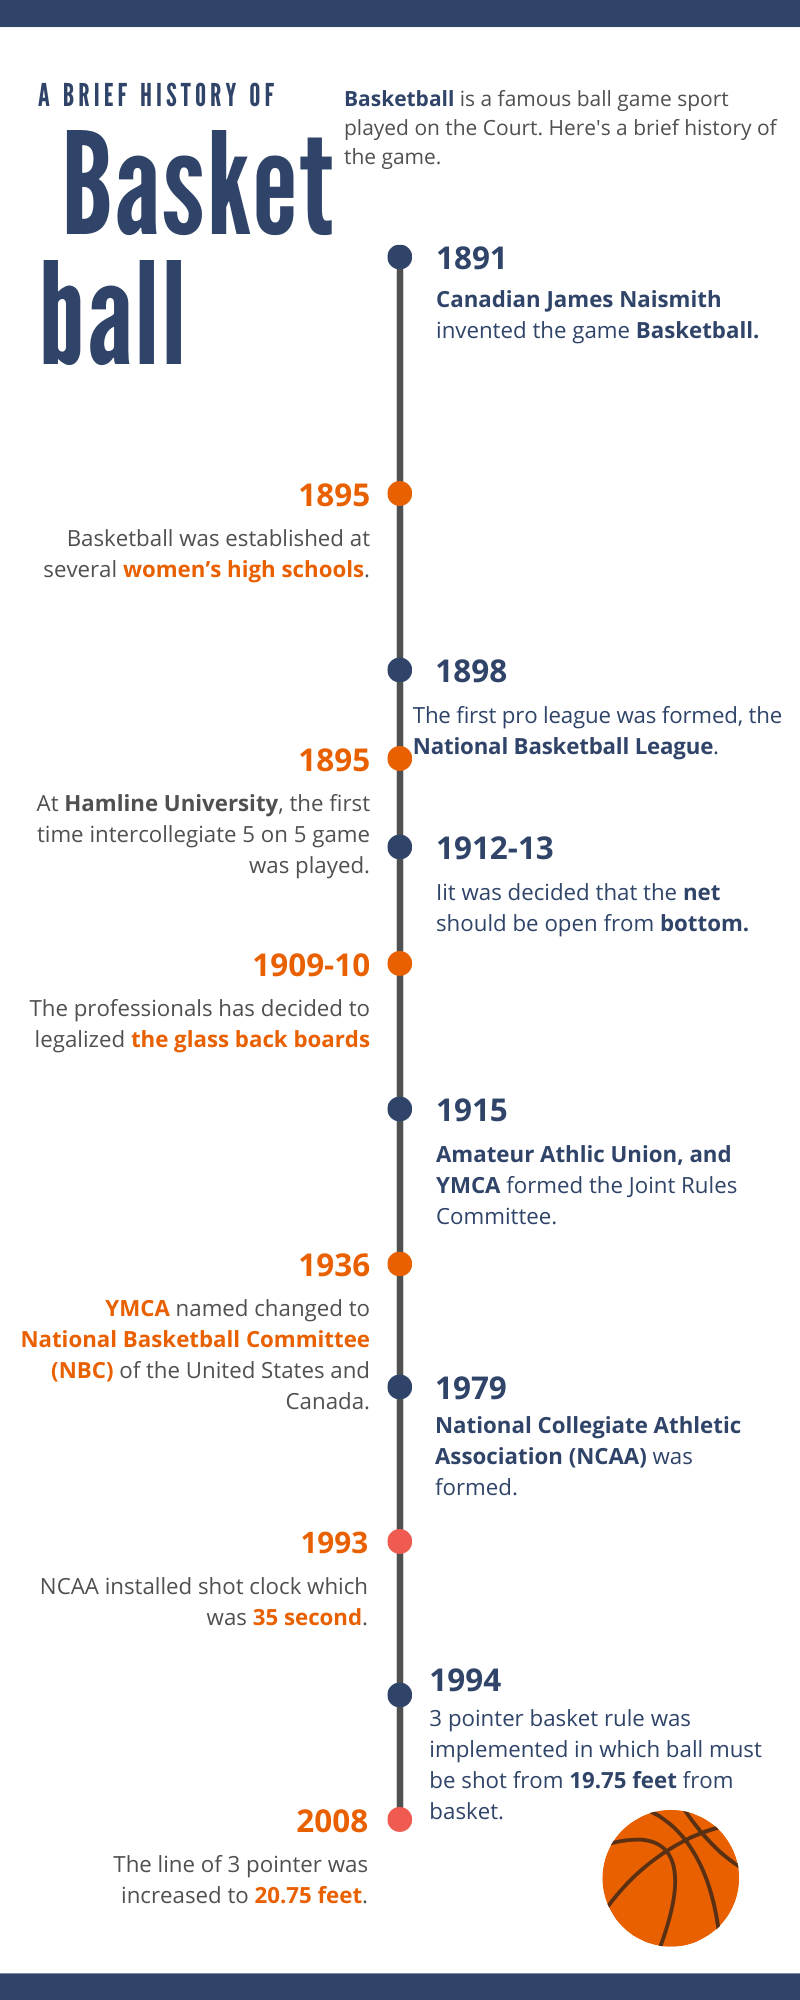 The brief history of basketball